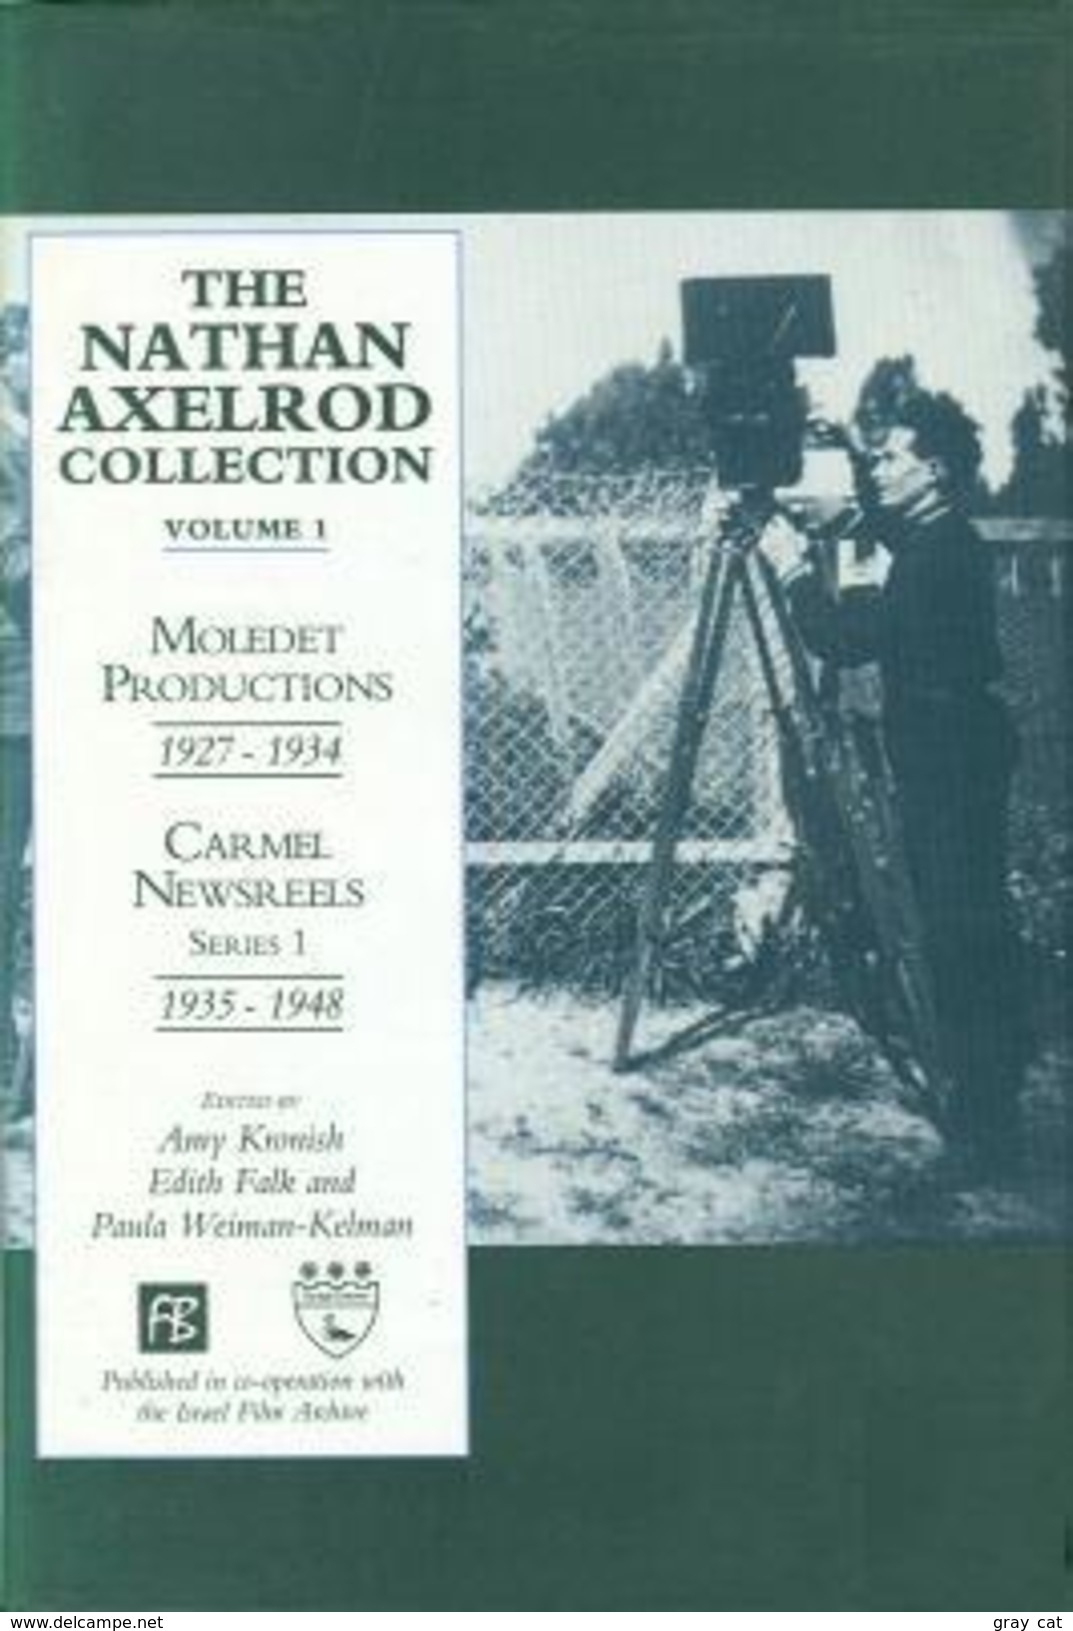 The Nathan Axelrod Collection: Moledet Productions, 1927-34, Carmel Newsreels, Series 1, 1935-48 Volume. 1 By Kronish, A - Photographie